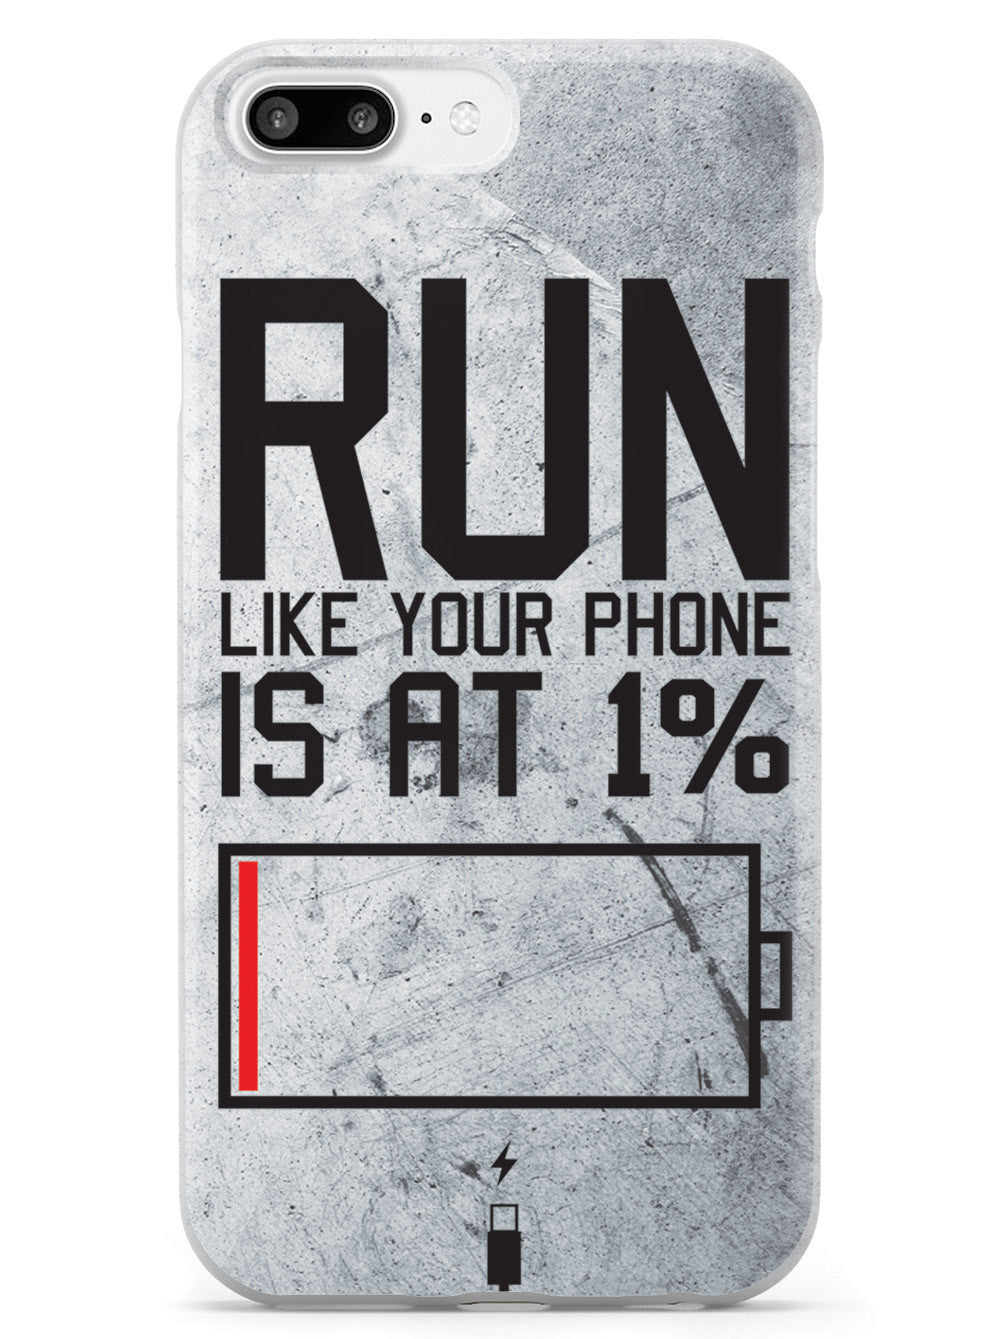 Run Like Your Phone Is At 1% - Fitness Case